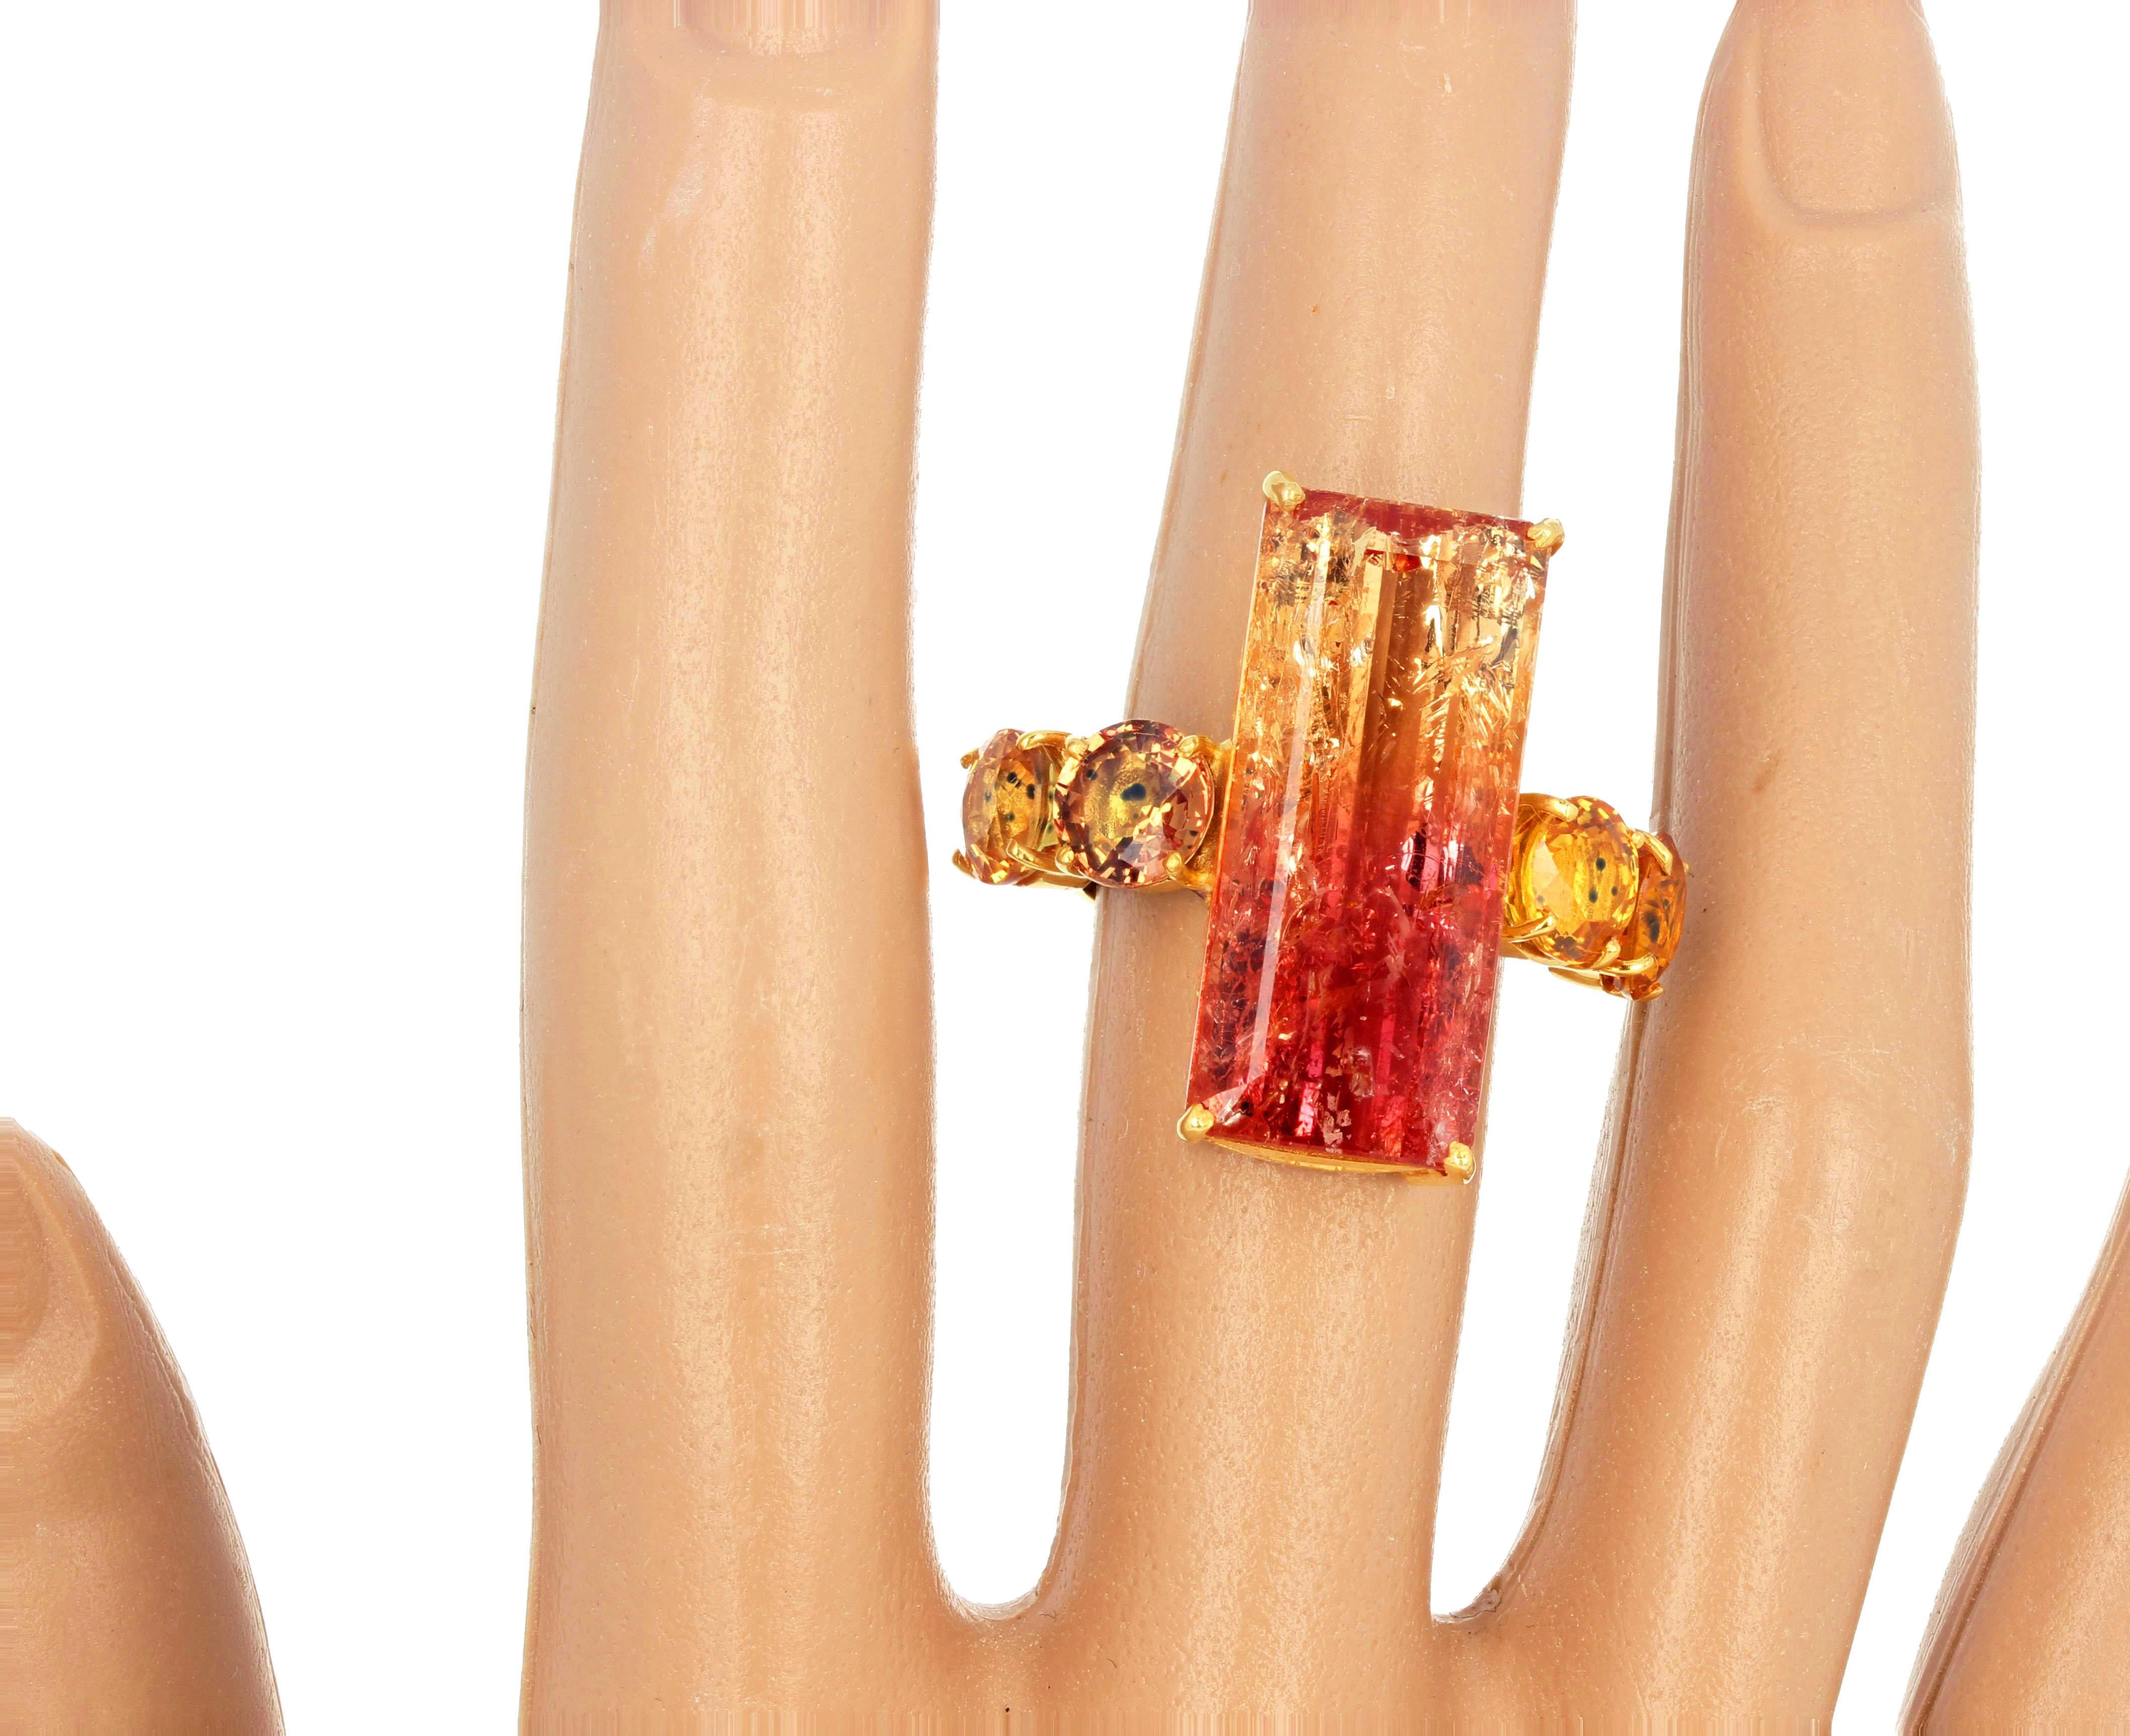 This rare unusual natural magic colors 20.41 carats emerald cut Citrine (25.5 mm x 11.3 mm) is flanked with dazzling bright natural 7mm Songea Sapphires.  The tiny black flecks in the Sapphires authenticate their origin from Songea.  The setting is